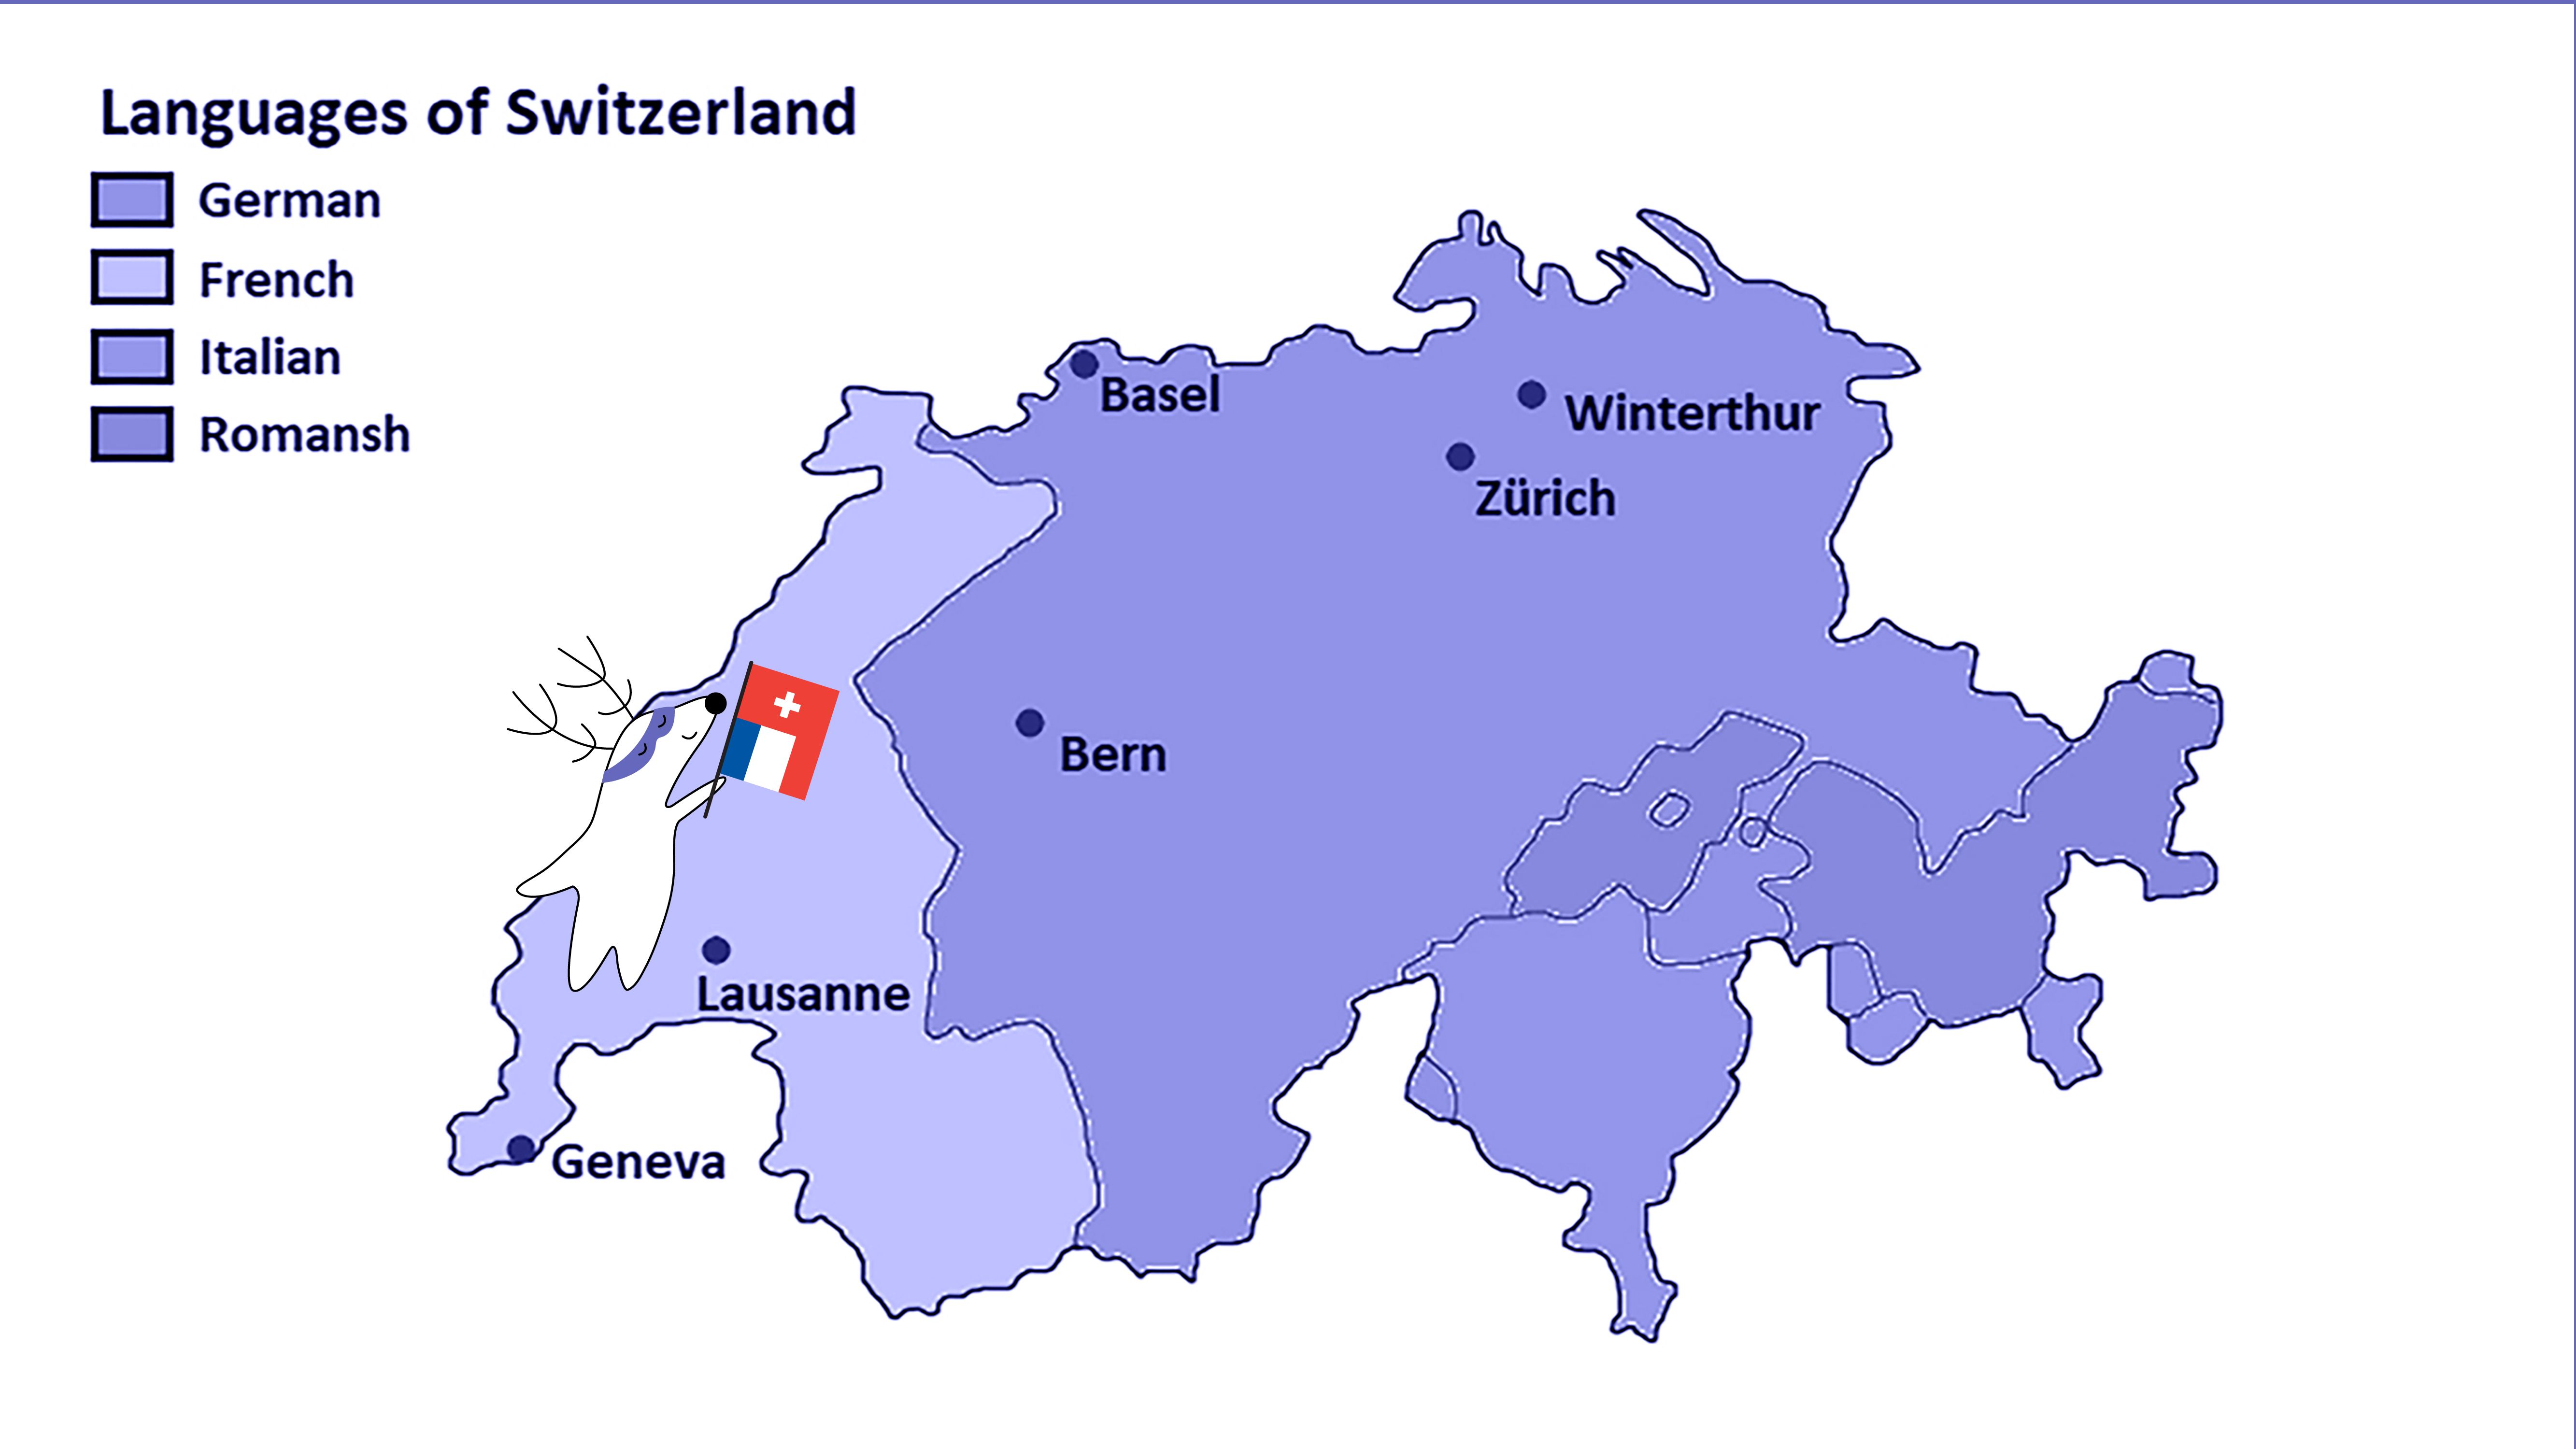 On the same map, there is Soren in the French-speaking part, under Geneva, holding a flag that is a mix of French and Swiss flags.